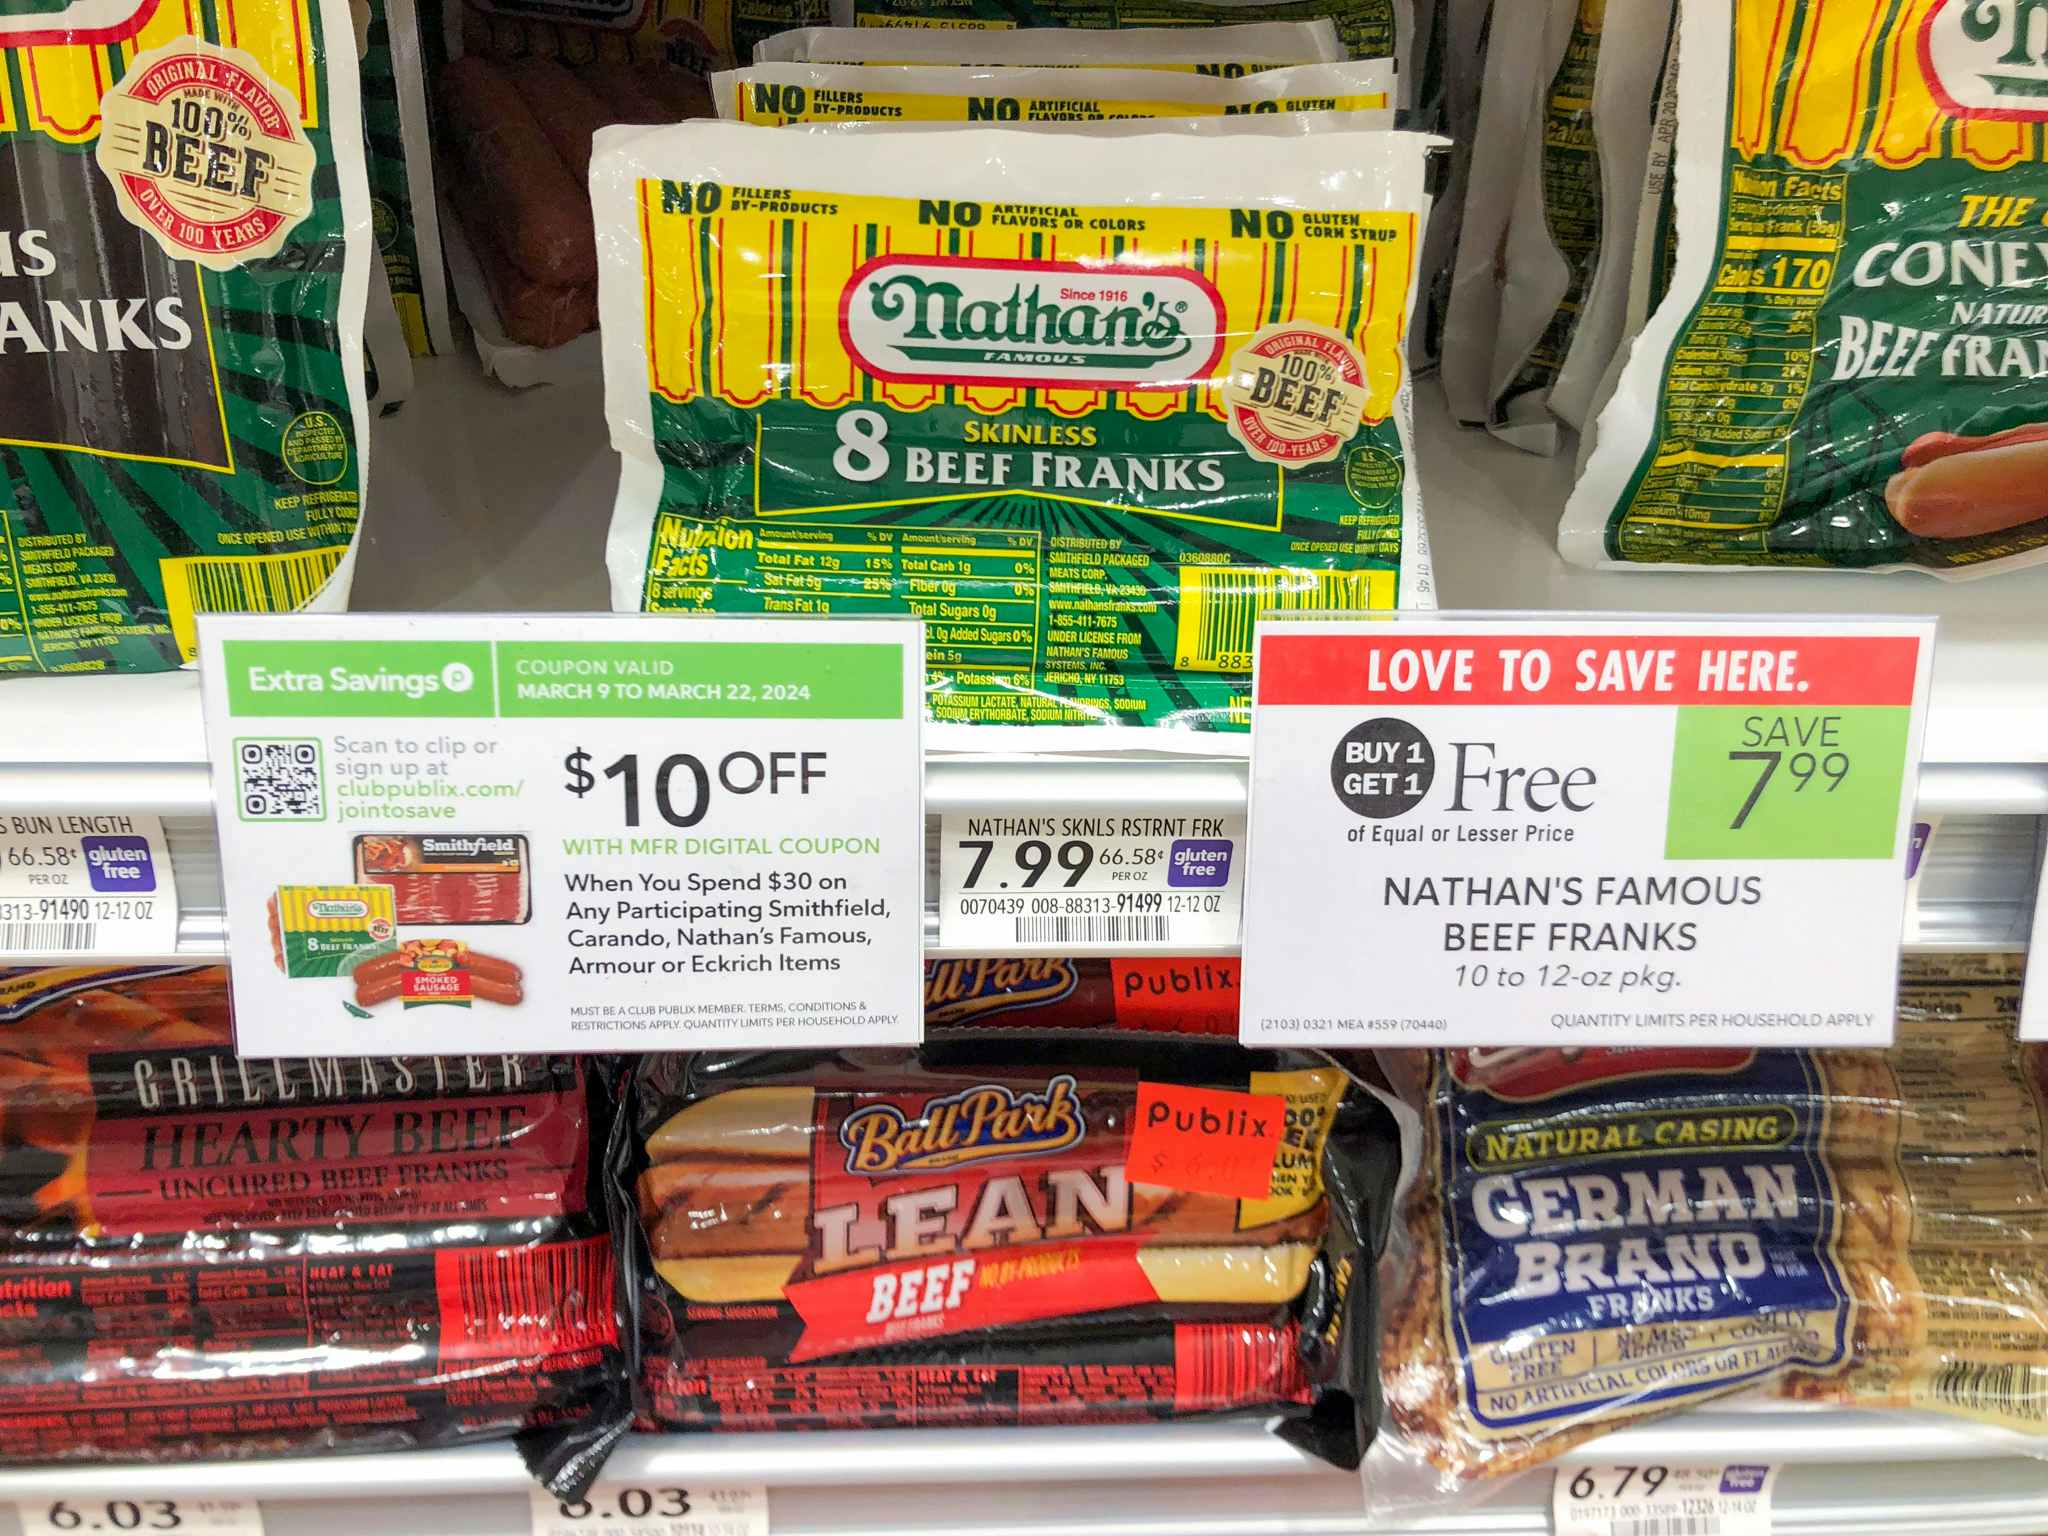 publix nathans famous skinless beef franks 1